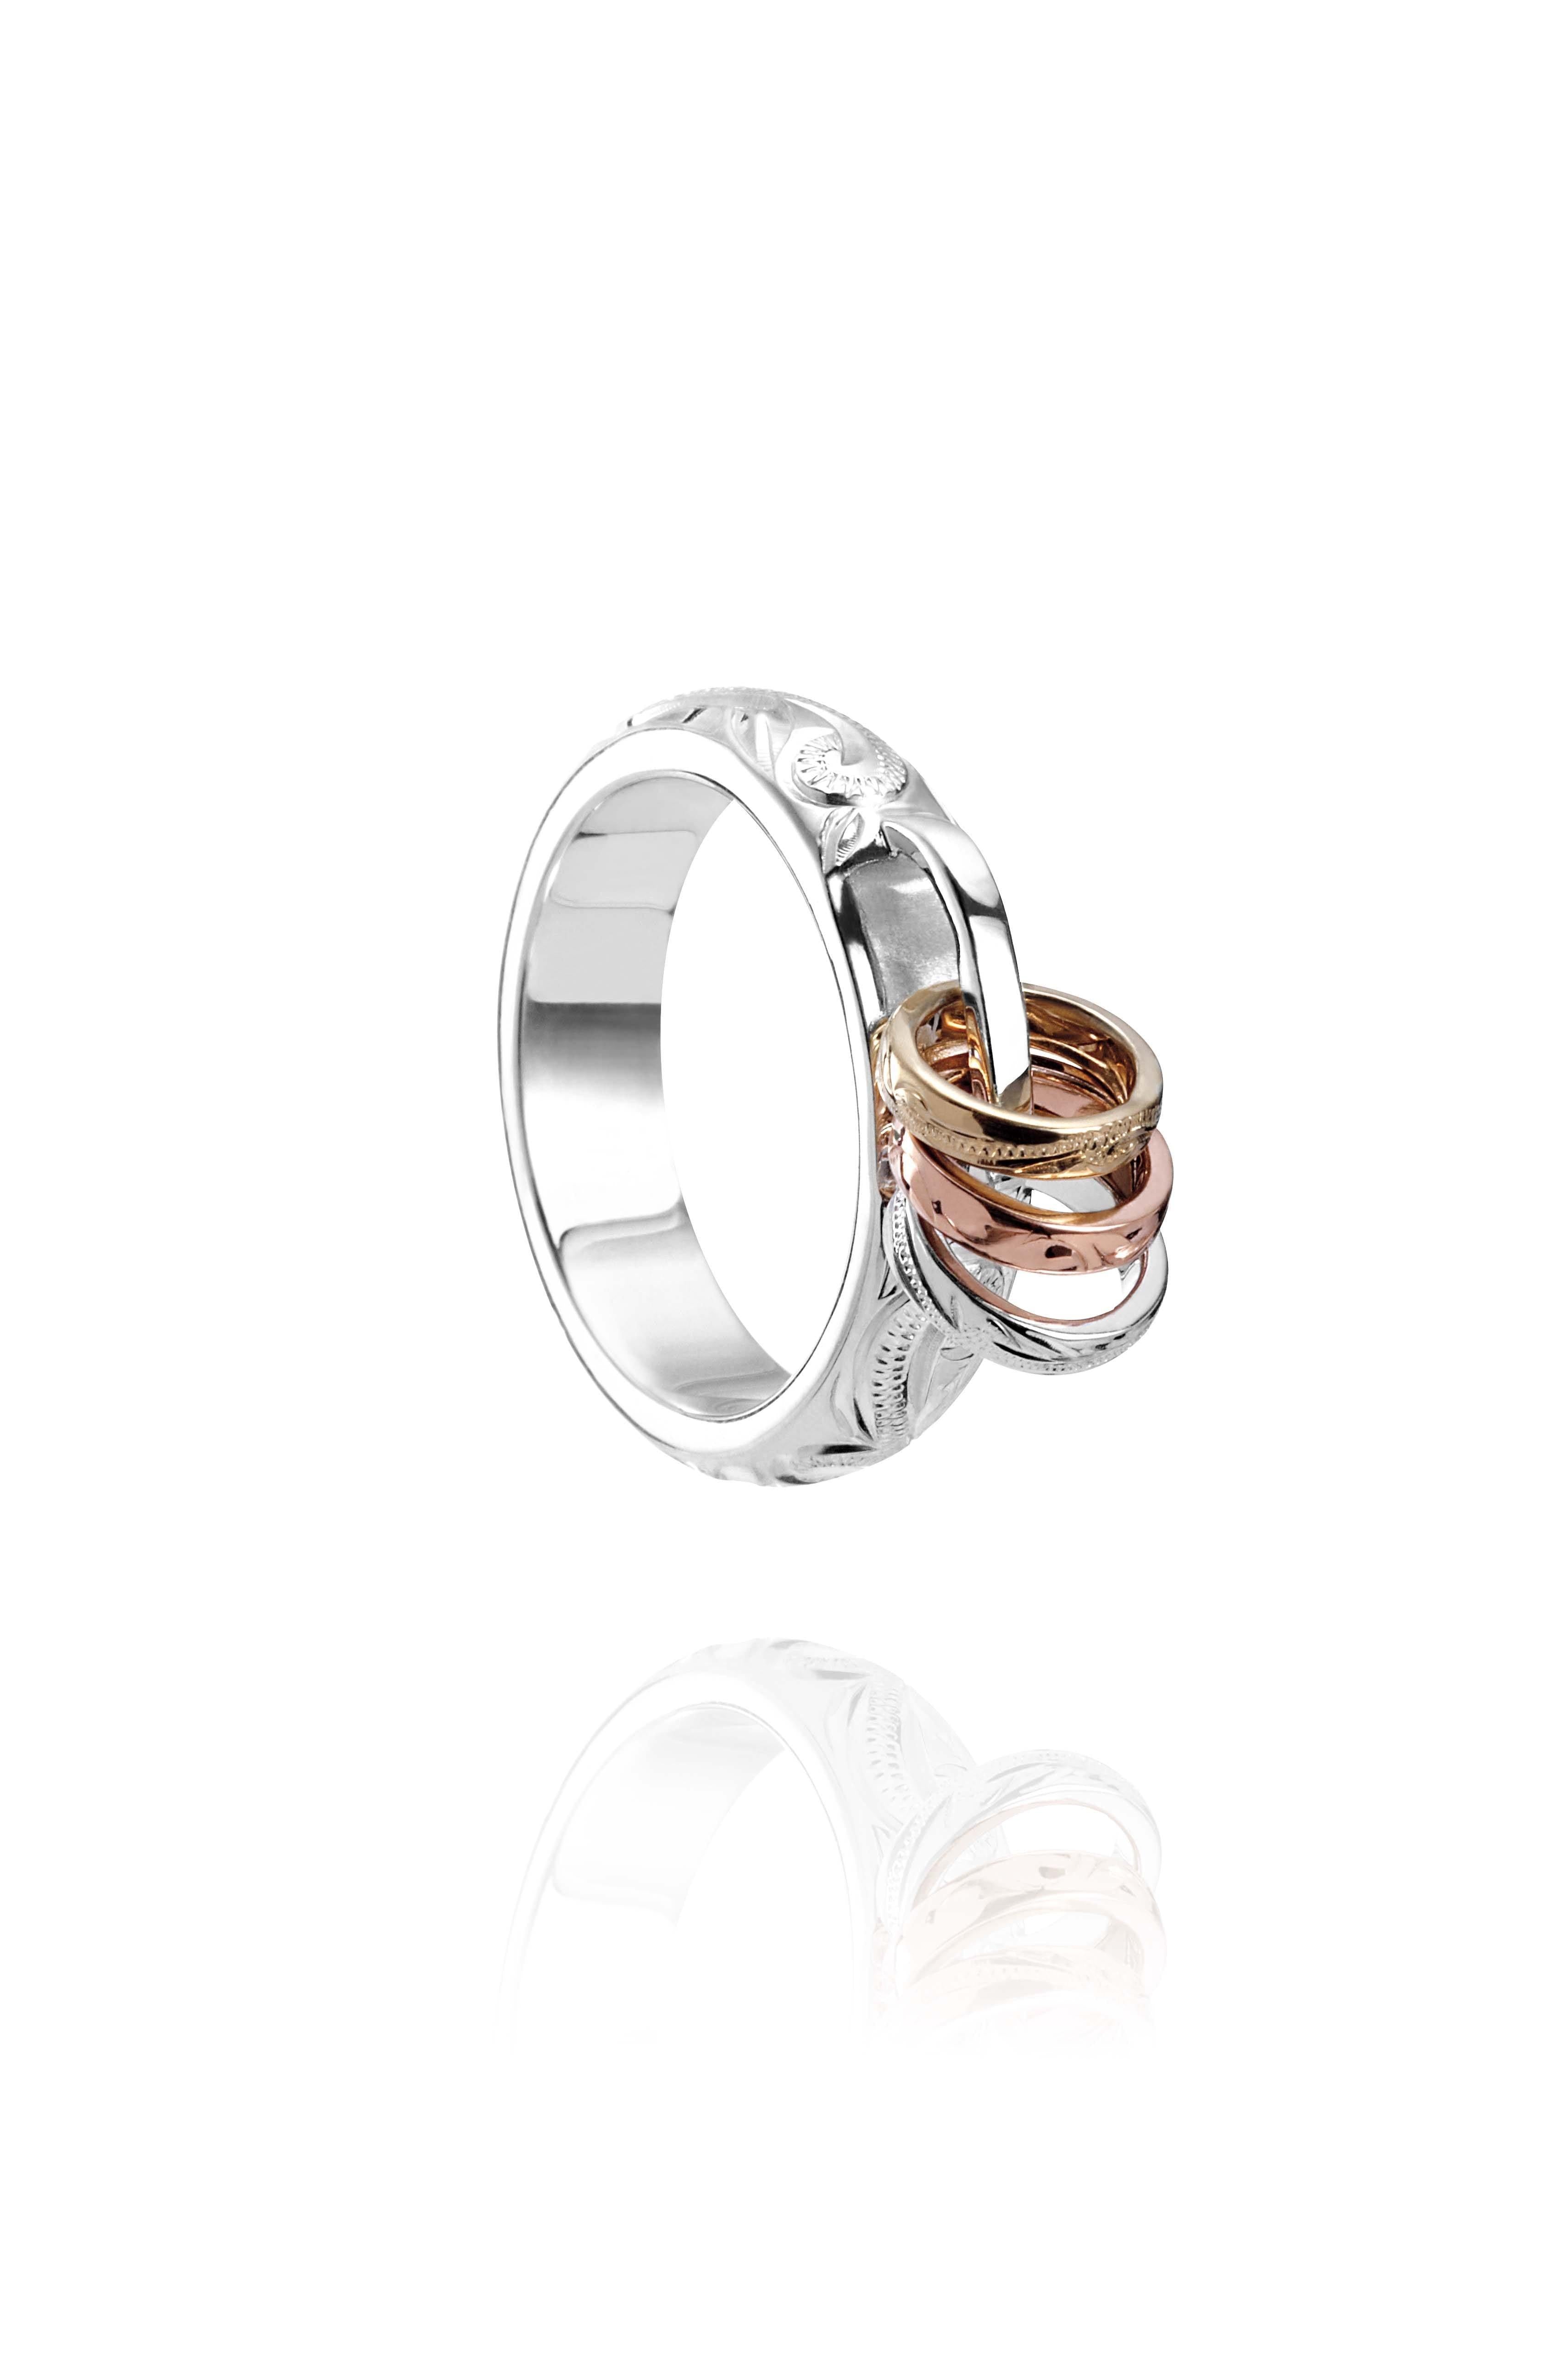 The picture shows a 14K white, yellow, and rose gold mini hoop tri-color ring.